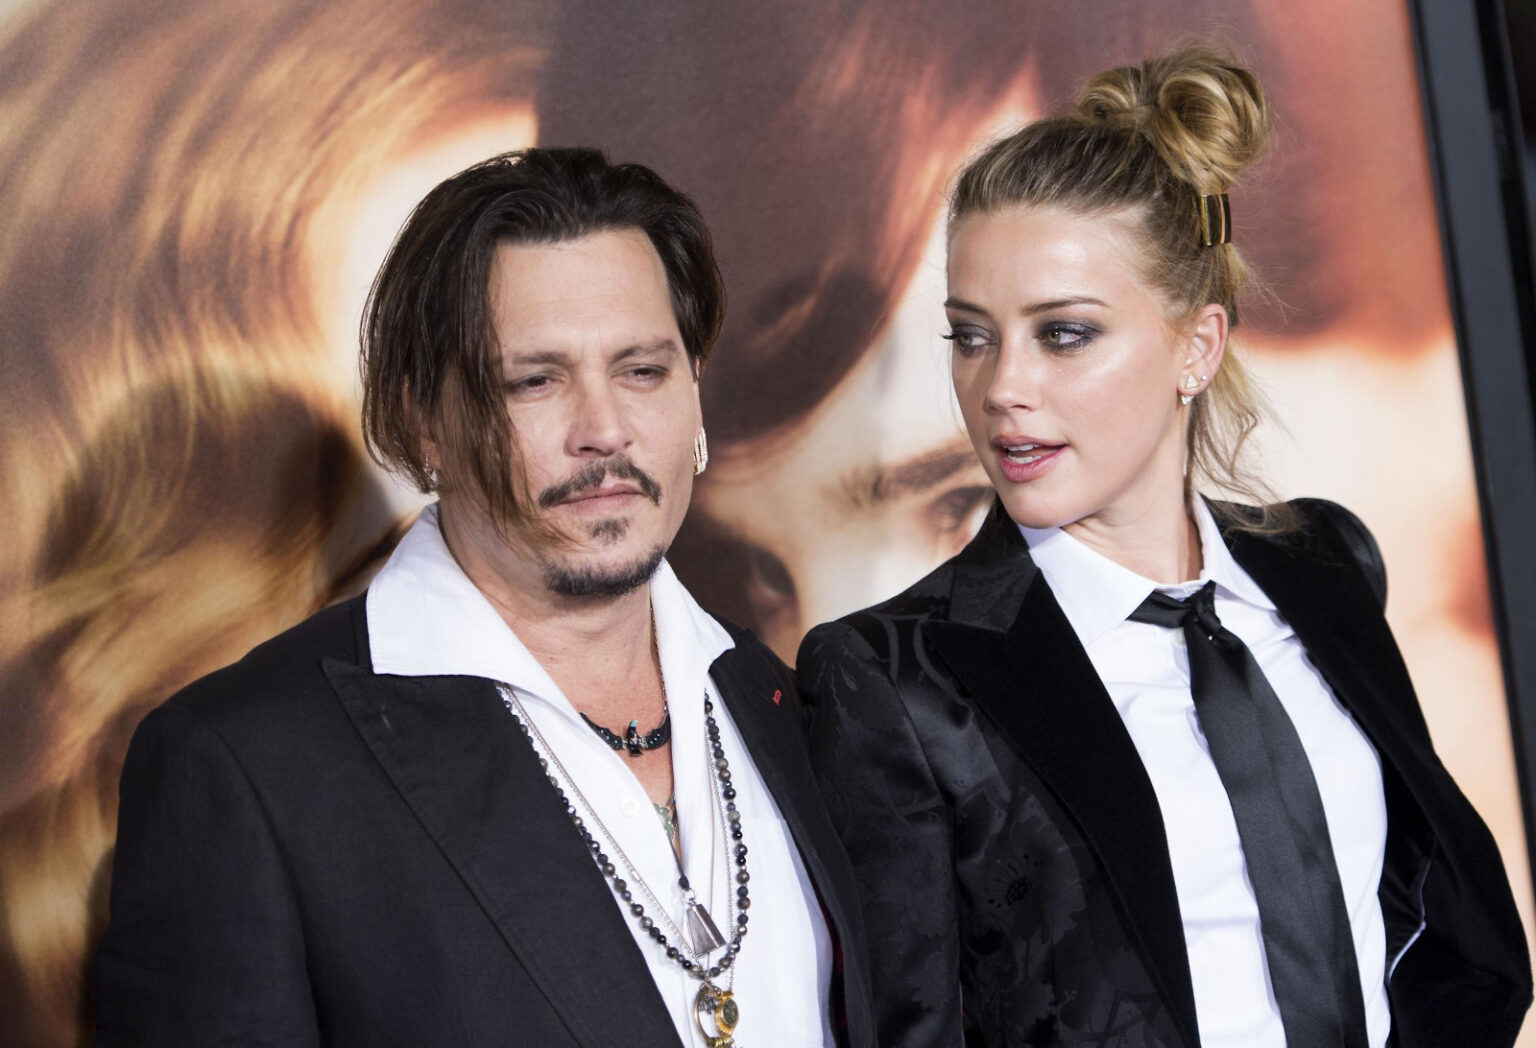 The libel trial of Johnny Depp against UK newspaper The Sun has gone into its second day. Here are shocking details revealed by Amber Heard.